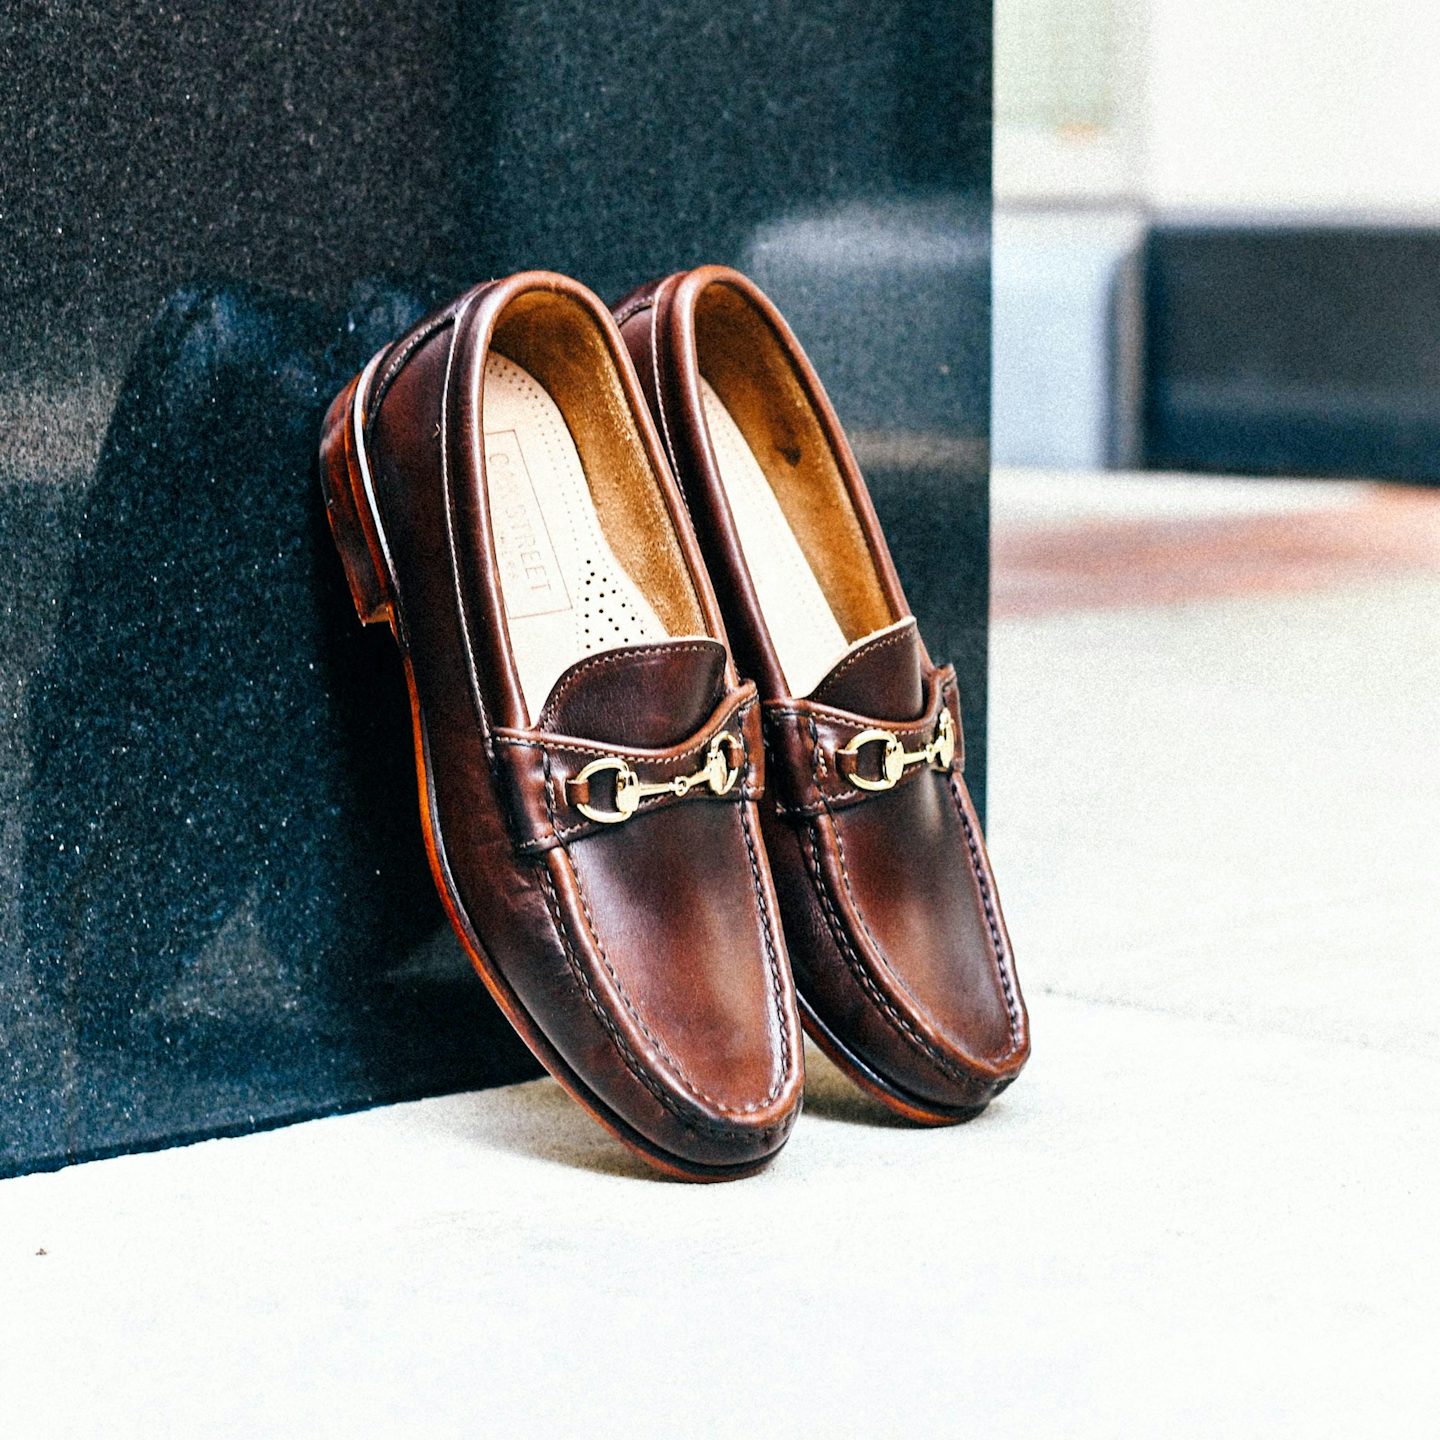 Bit Loafer - Brown Chromexcel, Leather Sole with Dovetail Toplift 